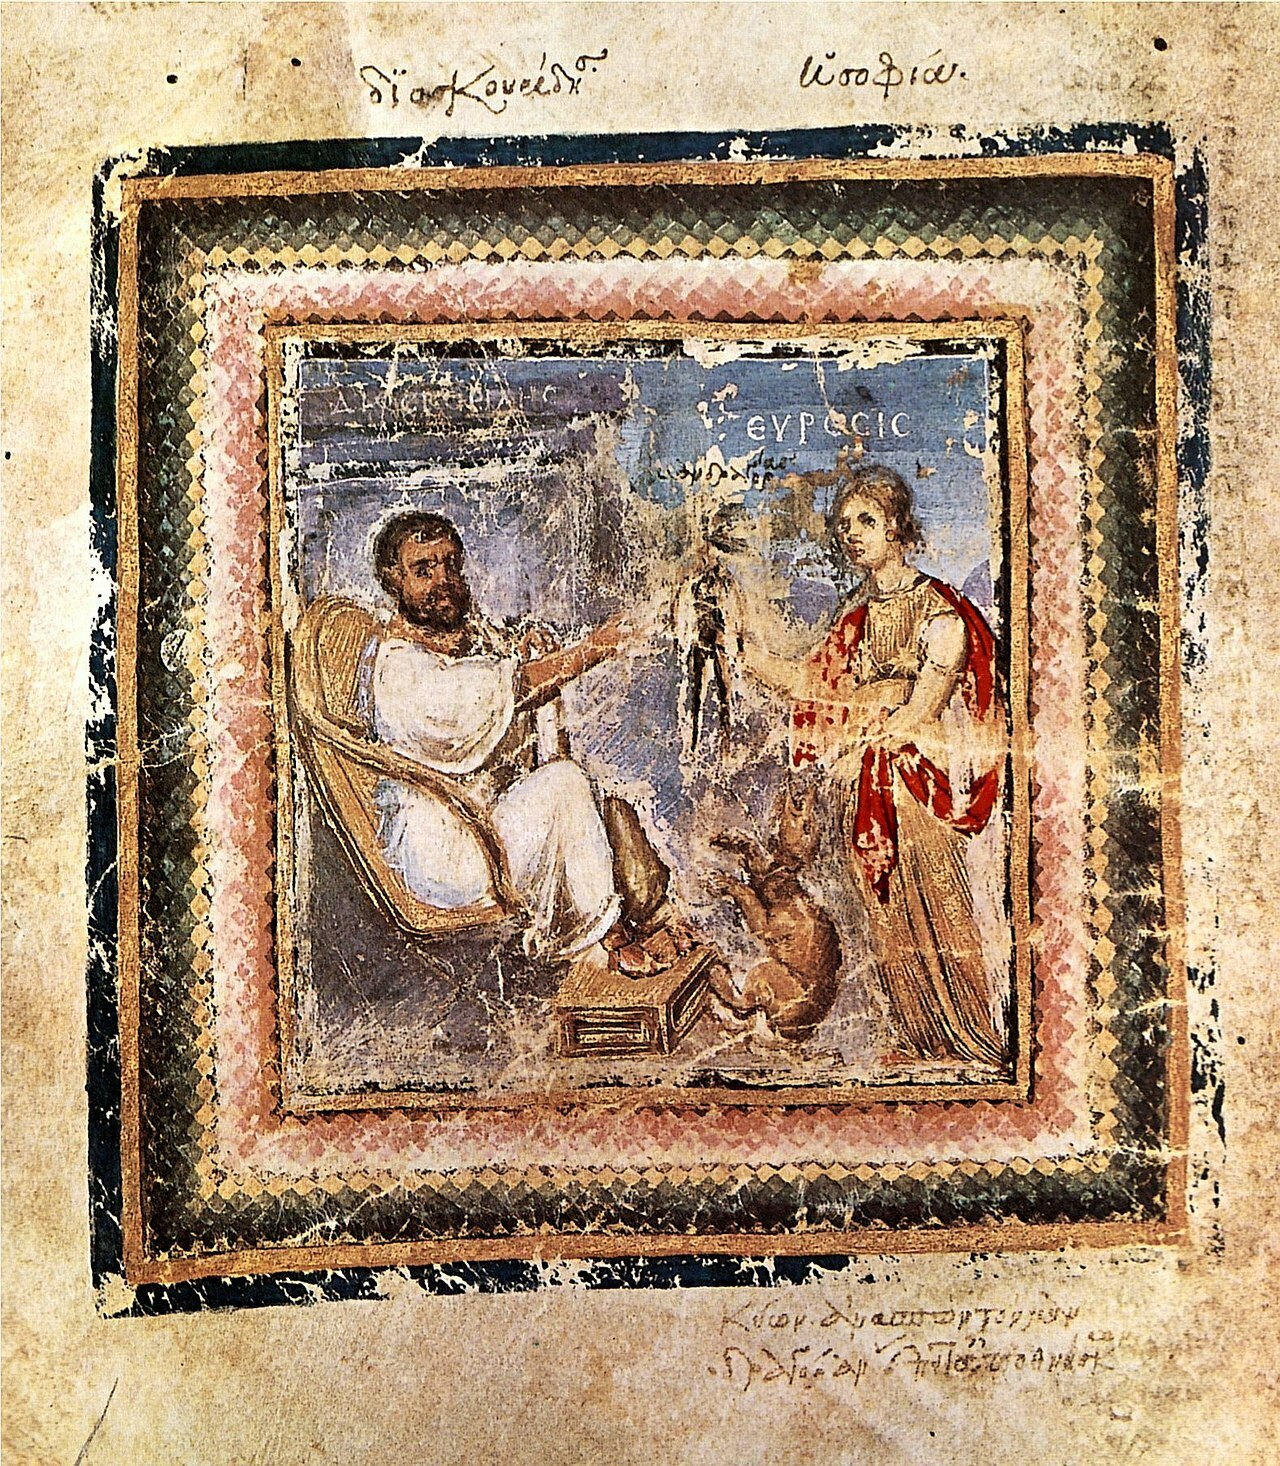 One two author portraits from the Vienna Dioscurides